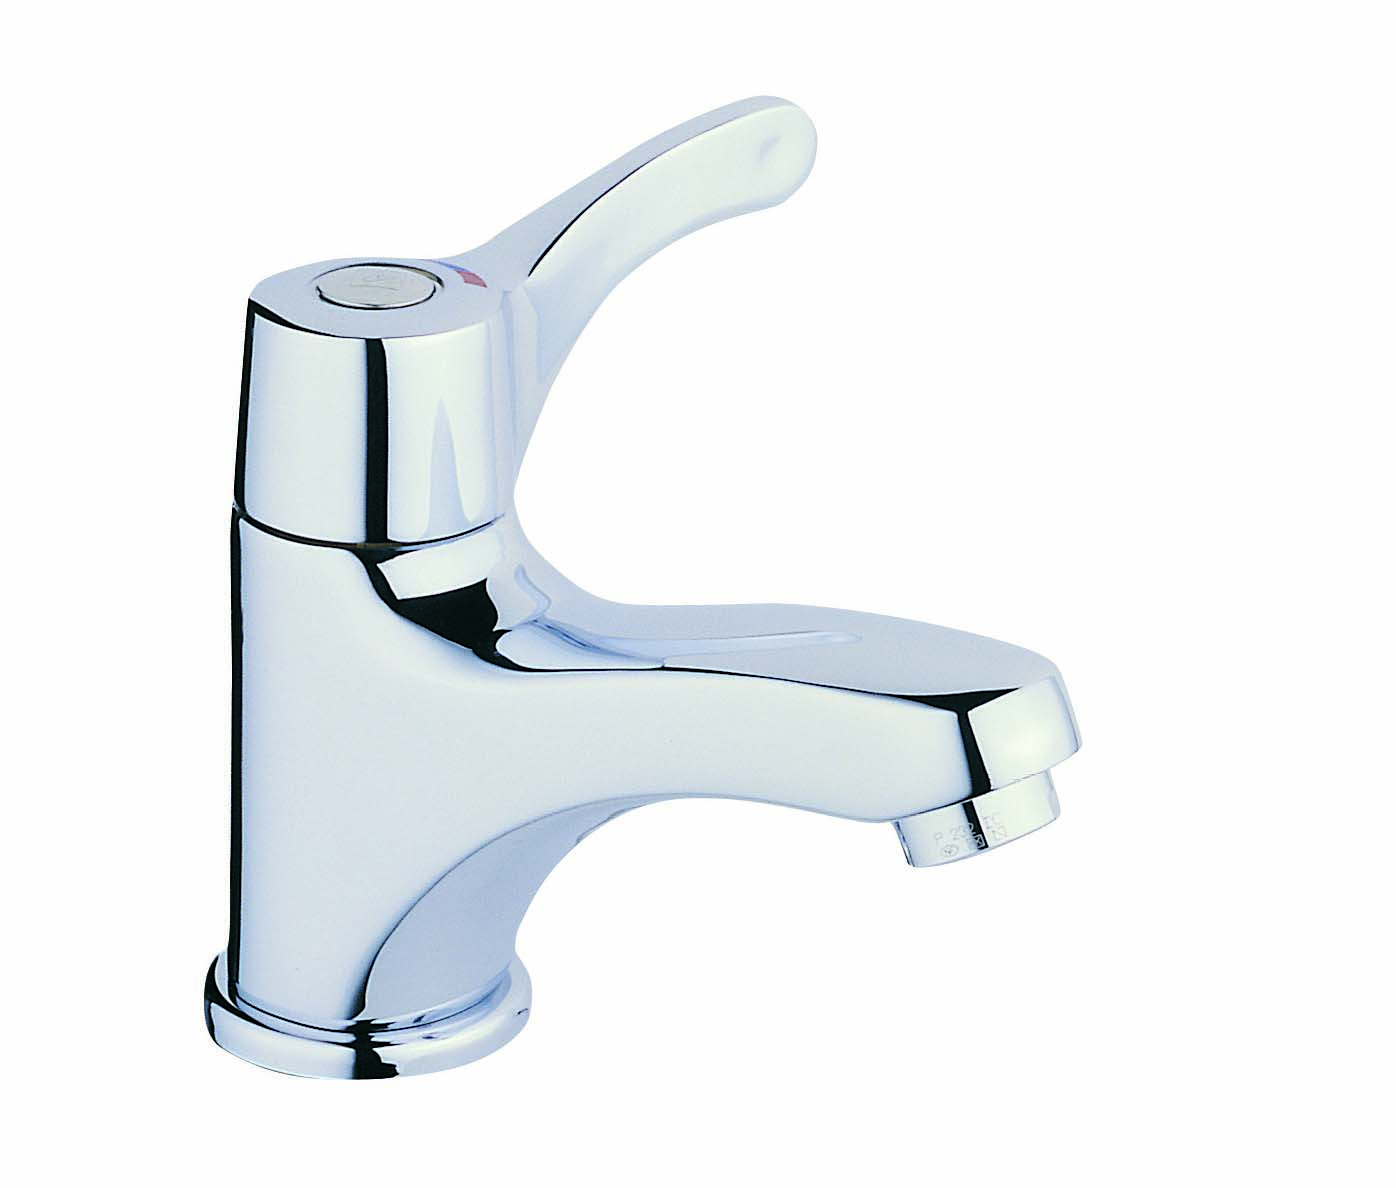 Aquatech Basin Mixer (Appropriate For Special Needs Usage)